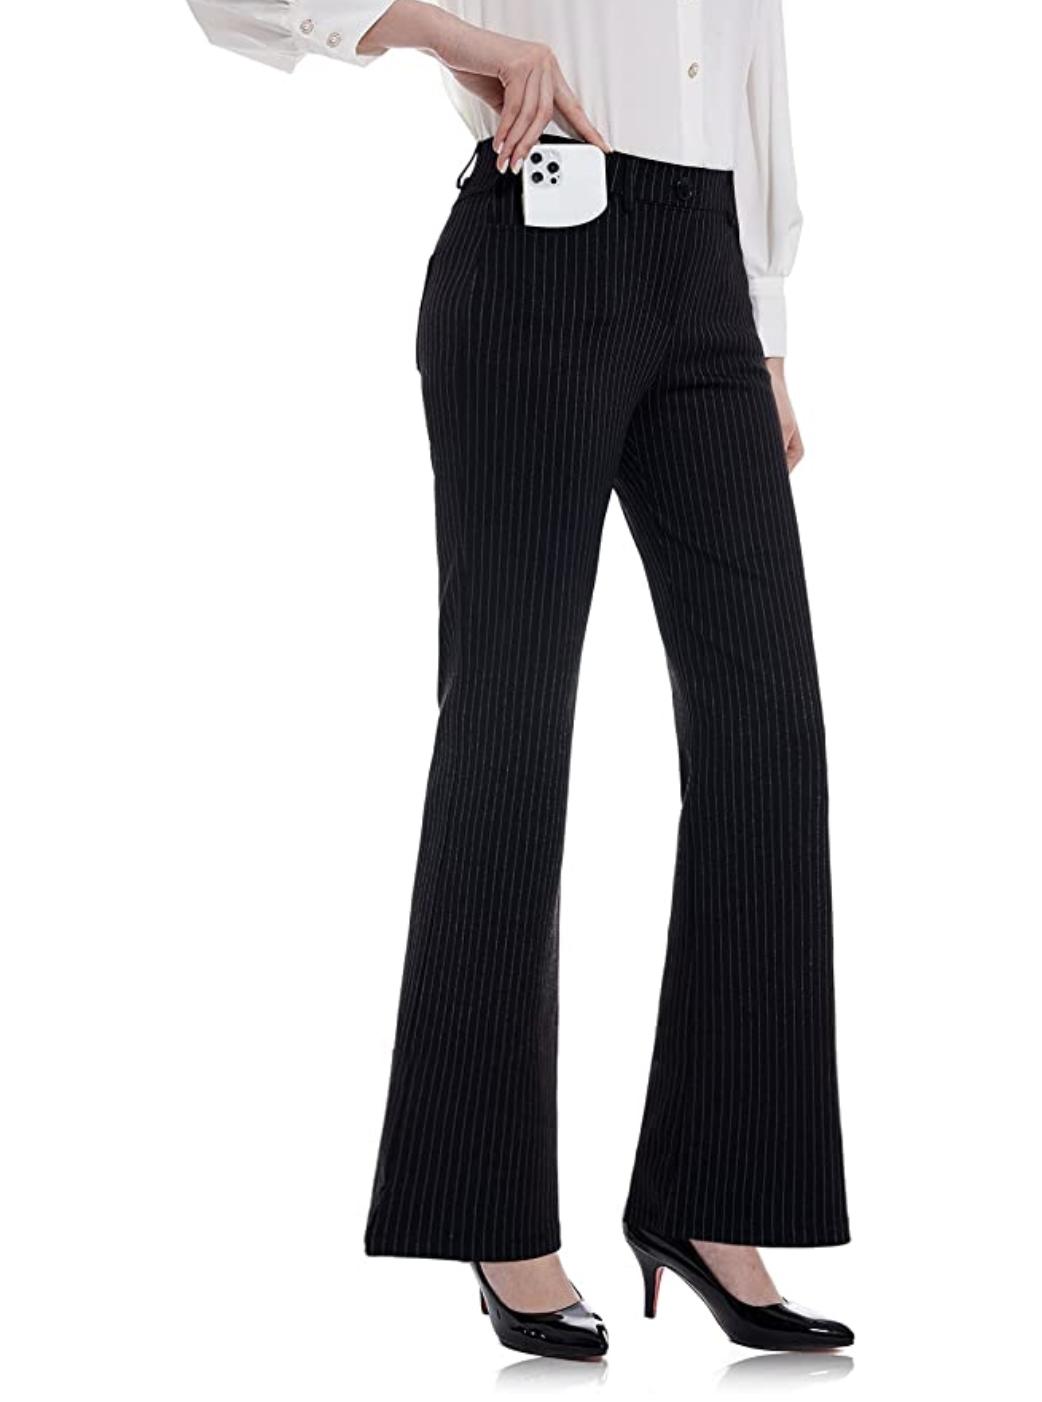 Tapata Women's Dress Pants Stretchy High Waist Bootcut Work Pants for Office 